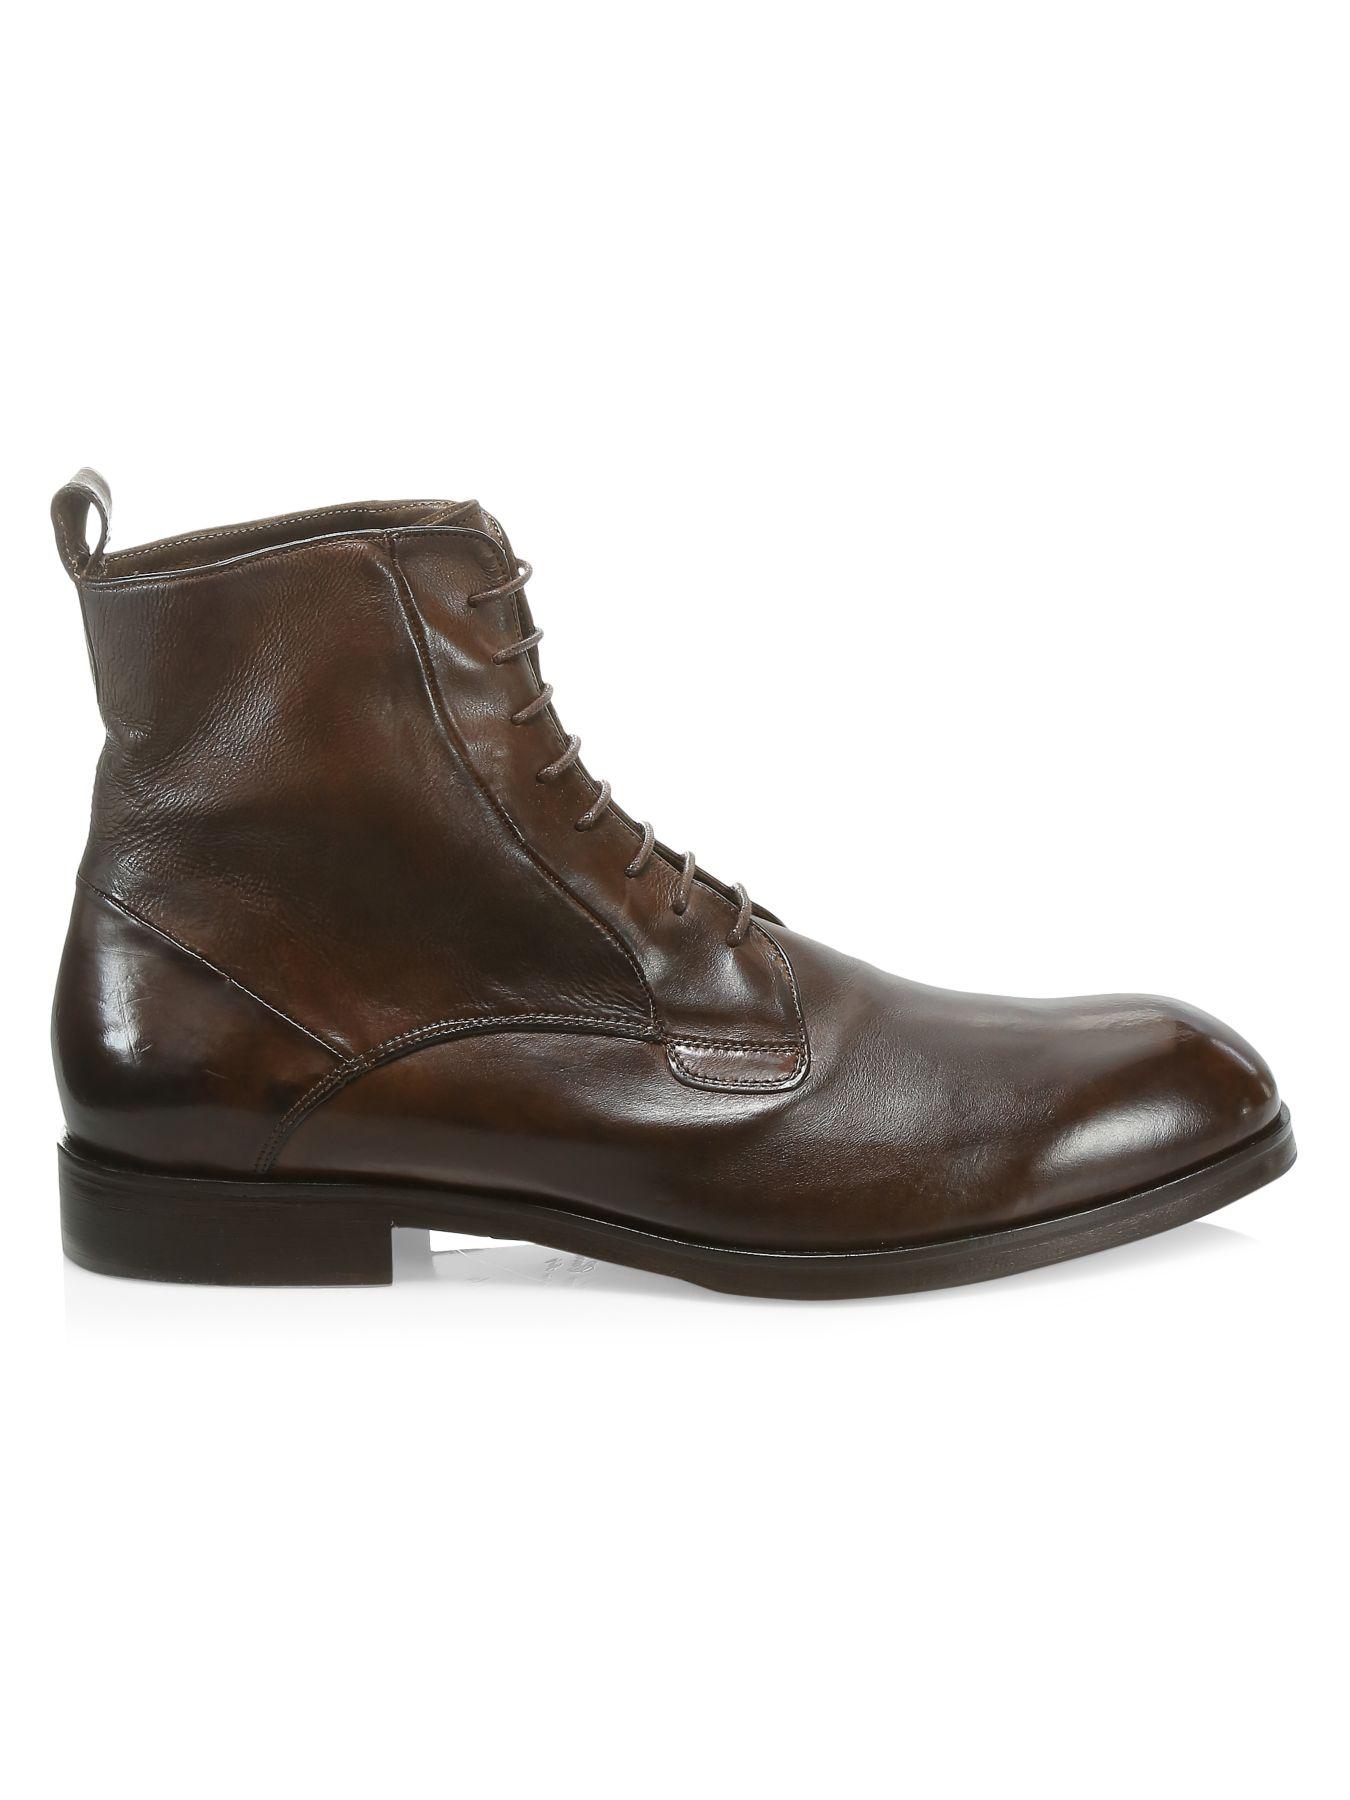 Saks Fifth Avenue Collection Washed Leather Combat Boots in Dark Brown ...